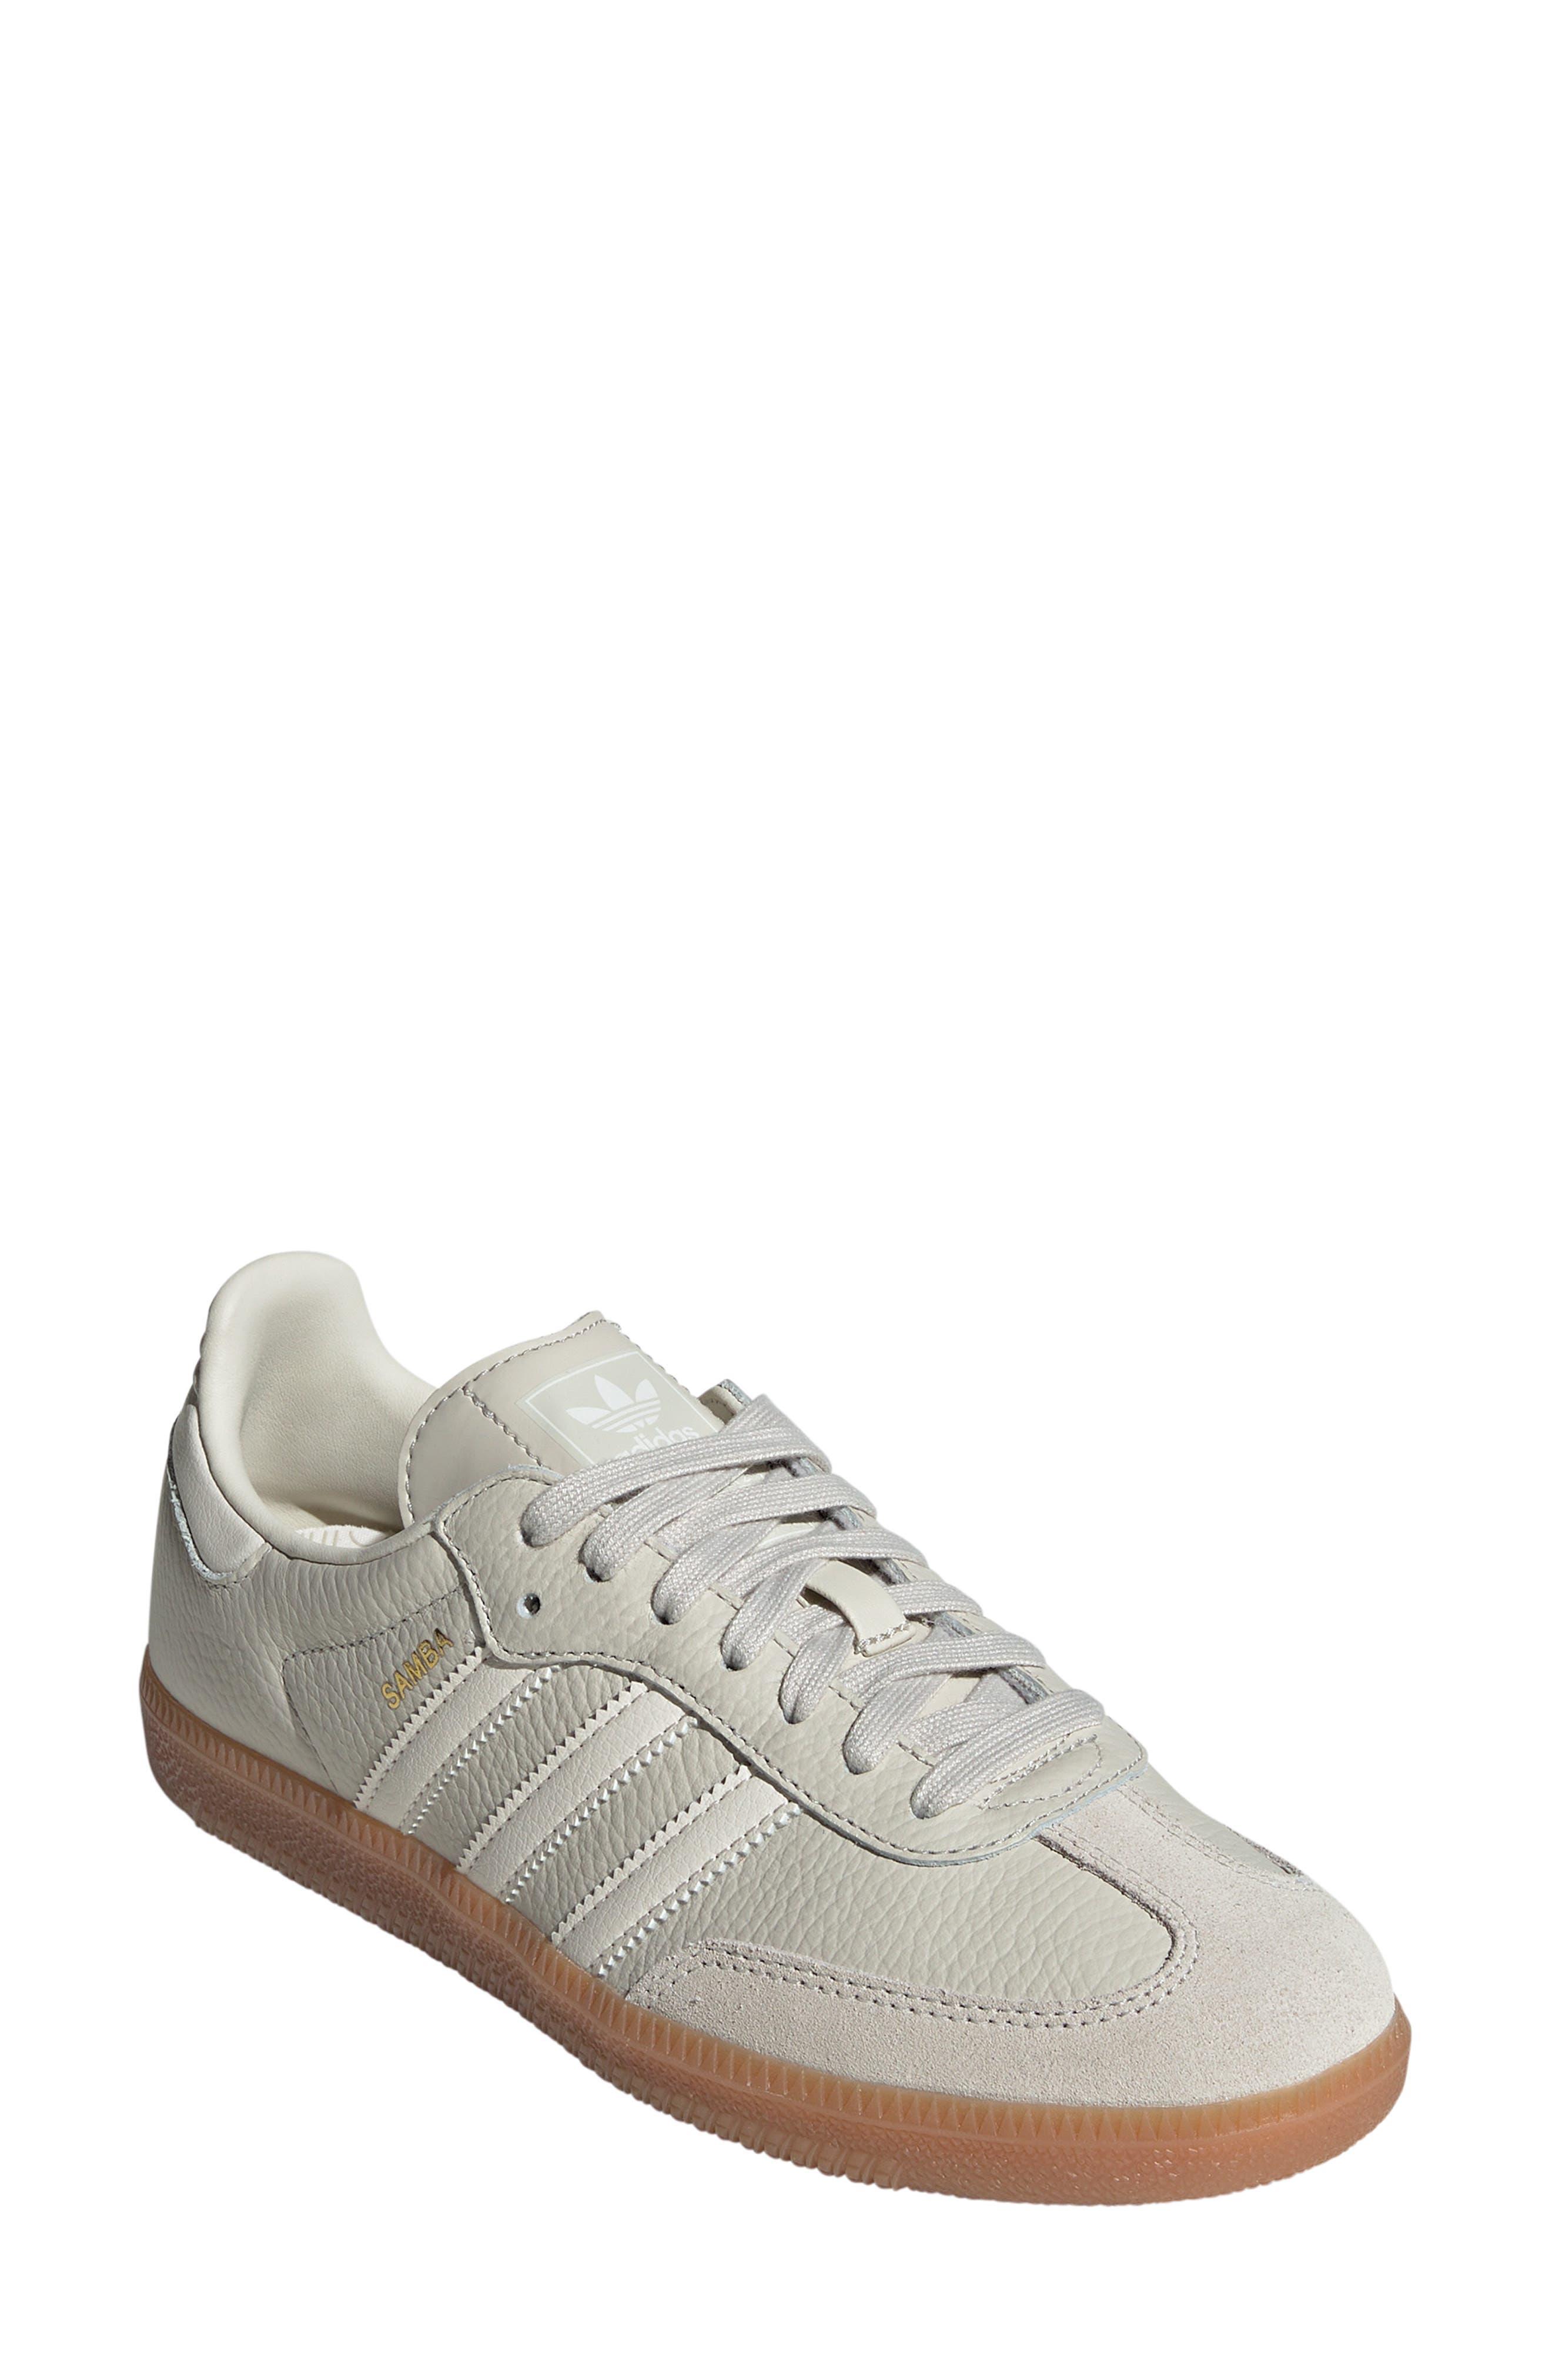 adidas Women's Samba Og Leather & Suede Lace Up Sneakers in White